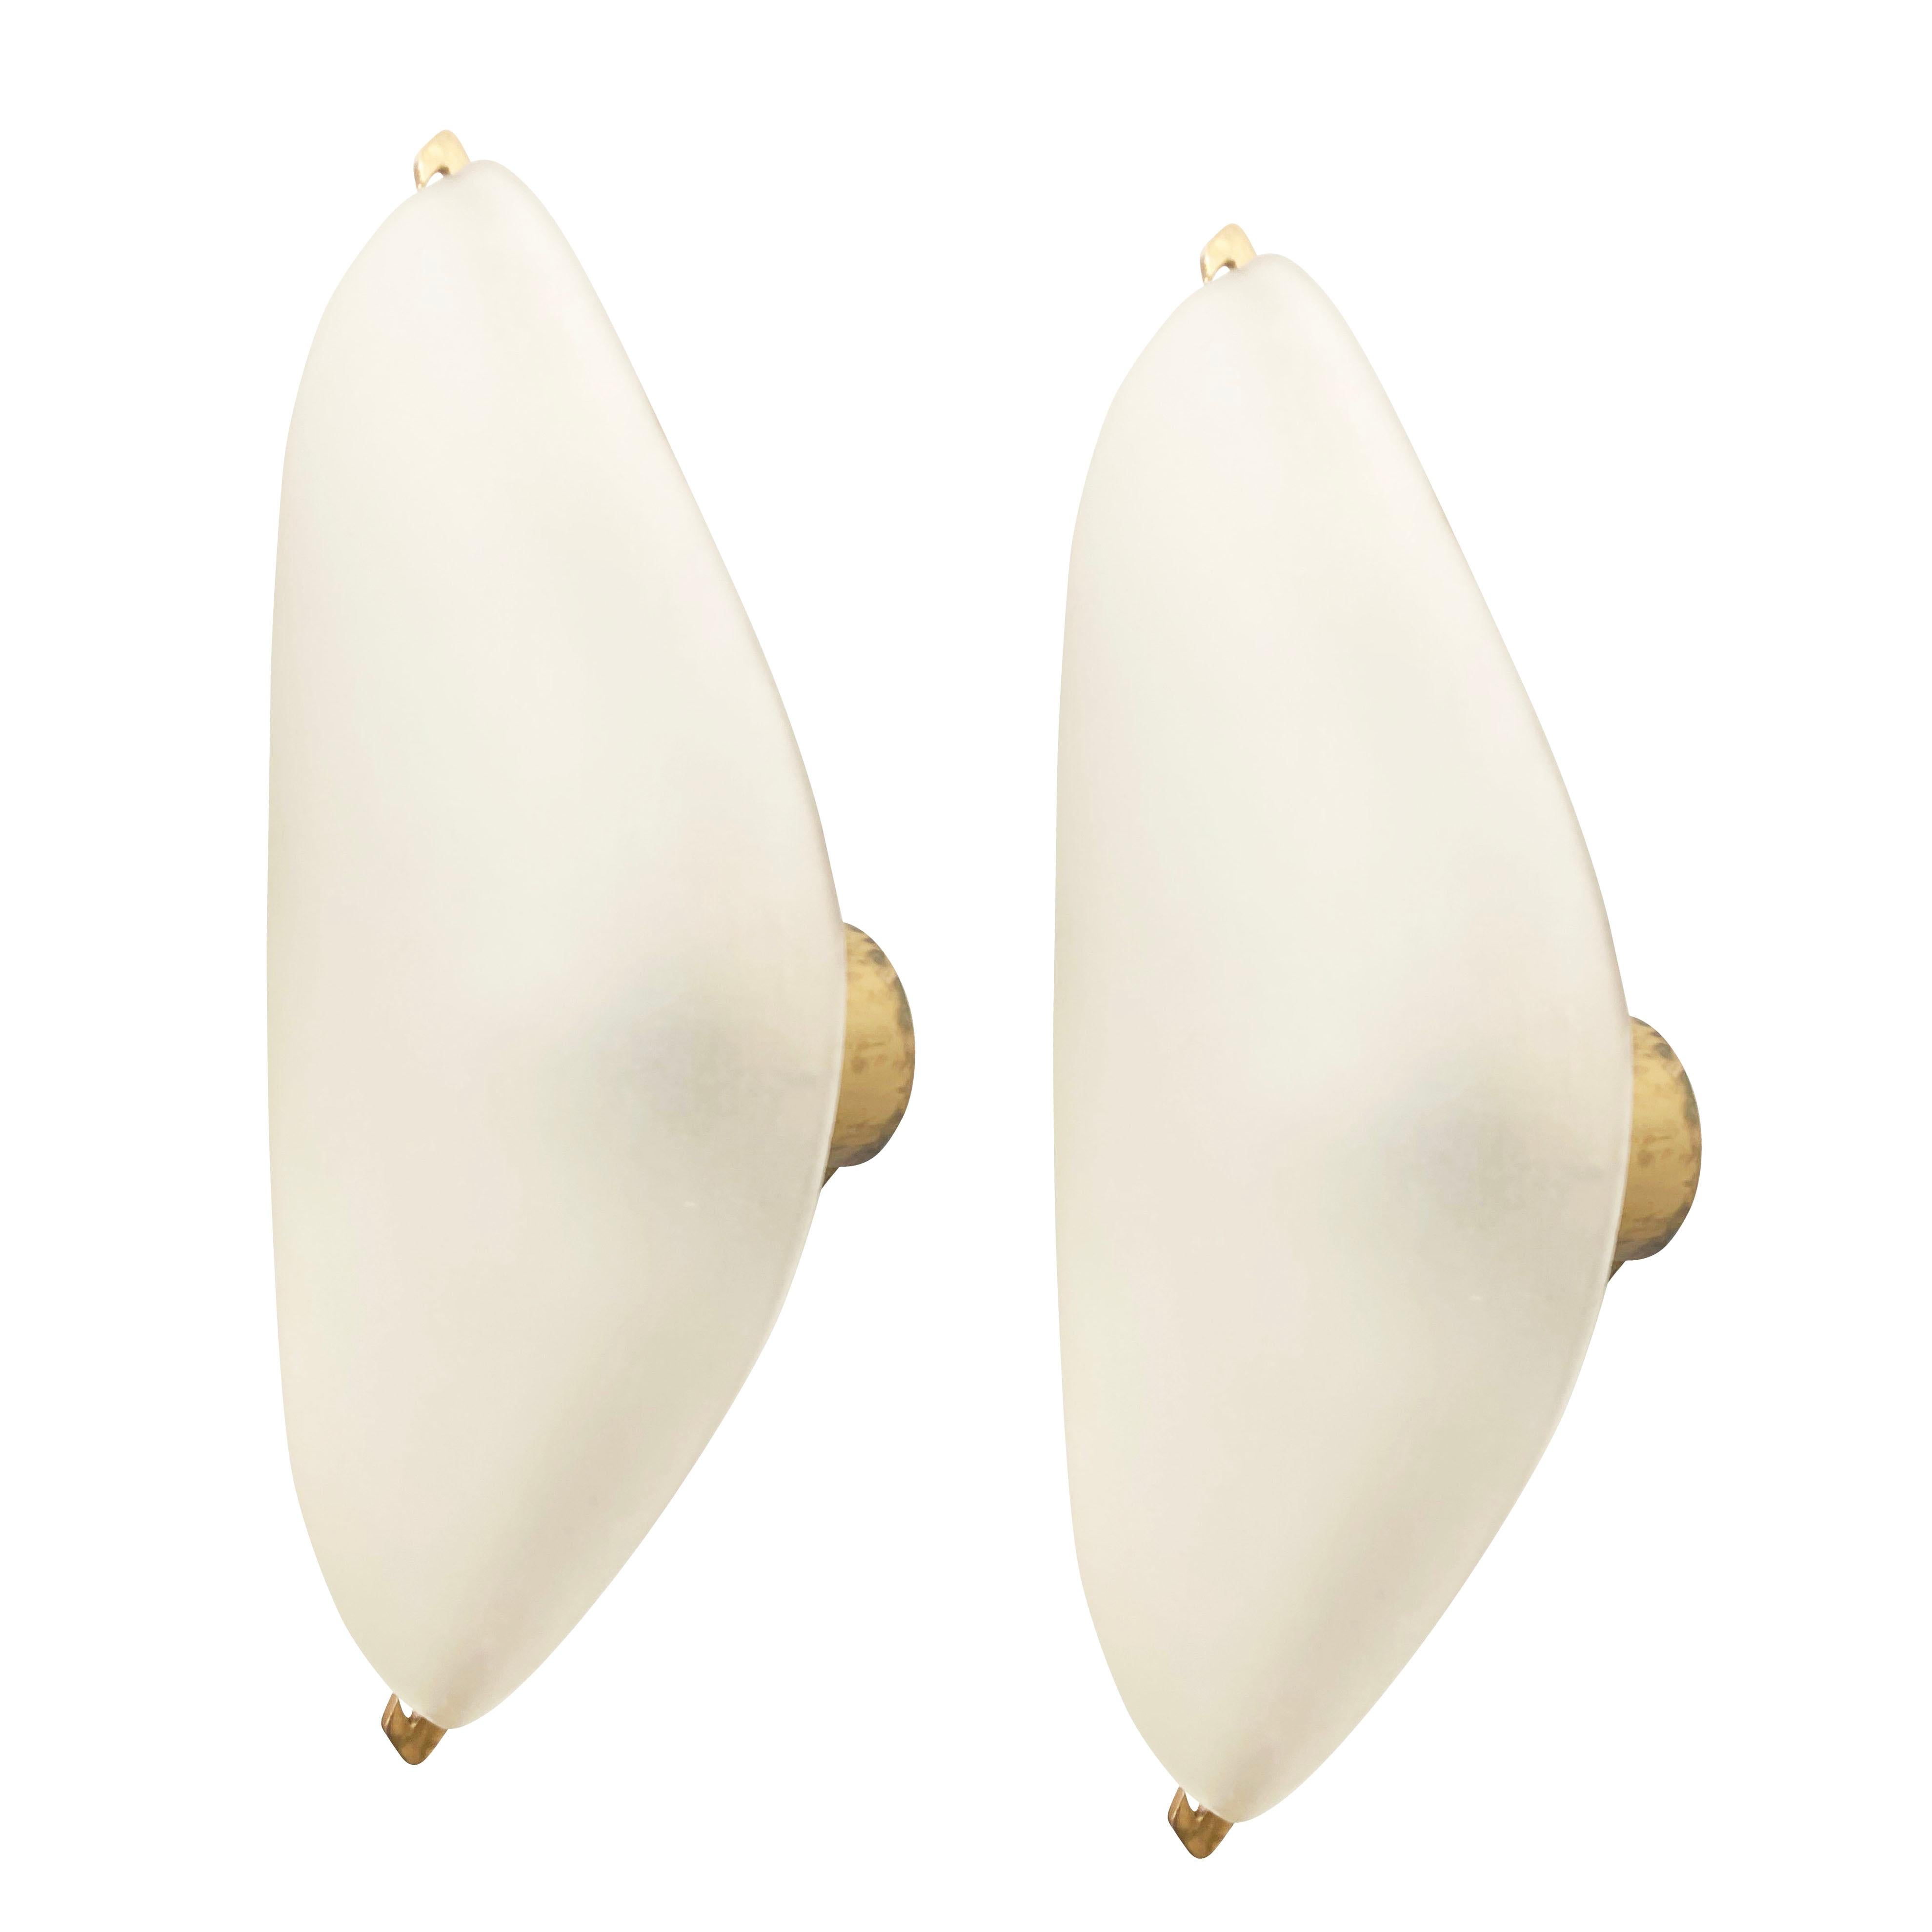 Pair of rare Fontana Arte wall lights model 2024 designed by Max Ingrand in the late 1950s. Each features a frosted glass shade on a brass frame. Minimalistic and elegant design. Each holds one Edison socket.

Condition: Excellent vintage